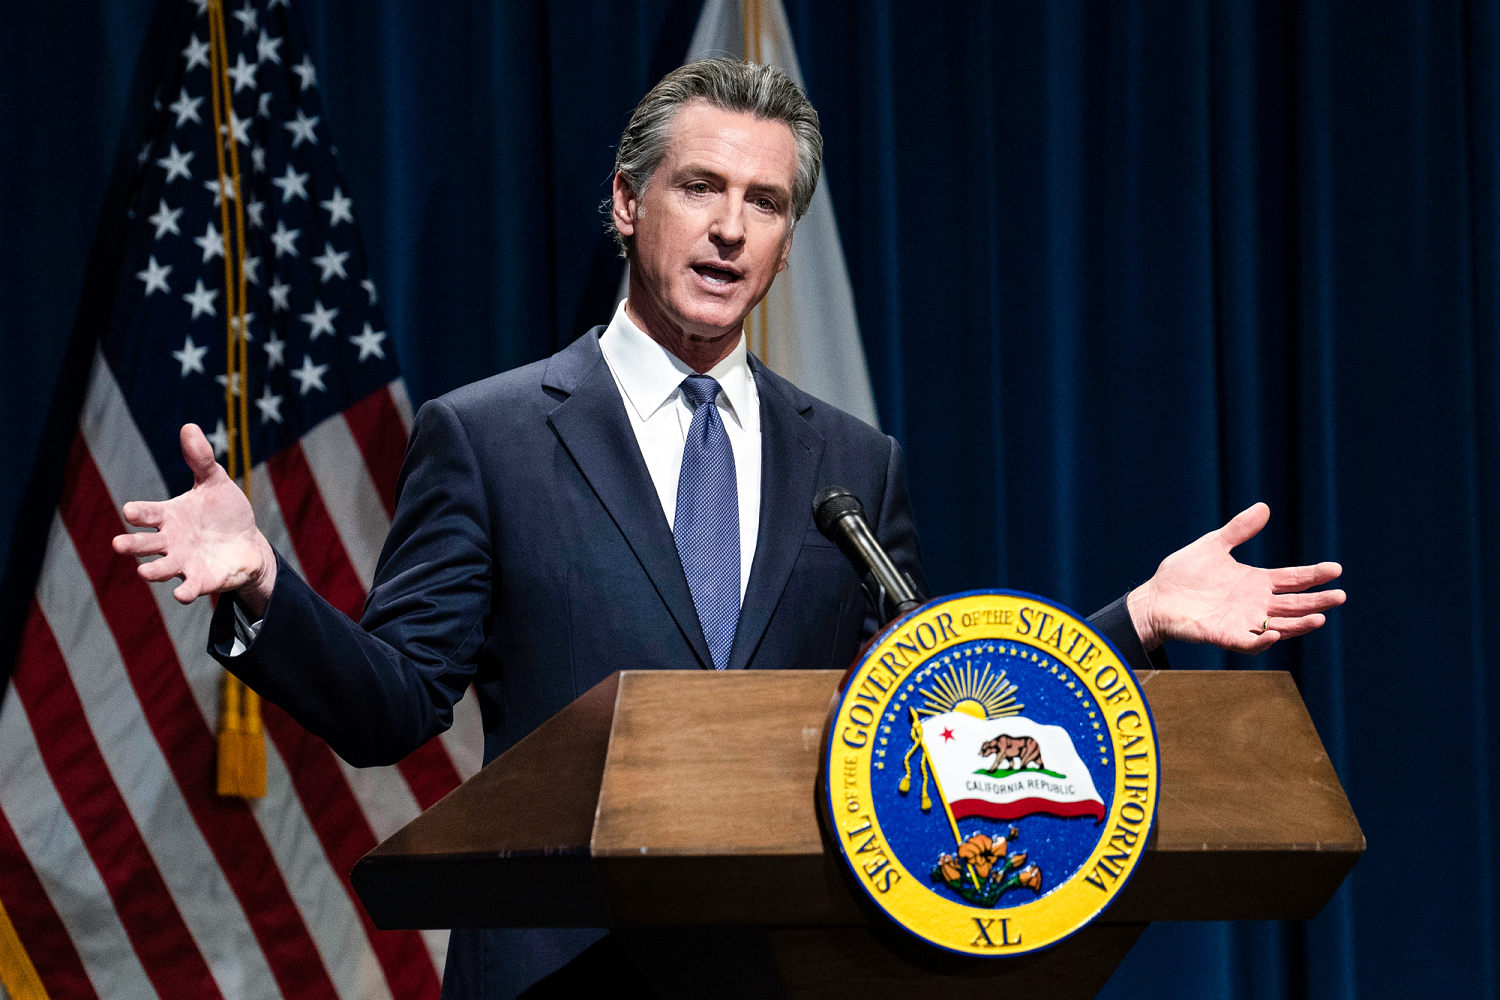 Gov. Gavin Newsom proposes bill to allow Arizona doctors to perform abortions in California